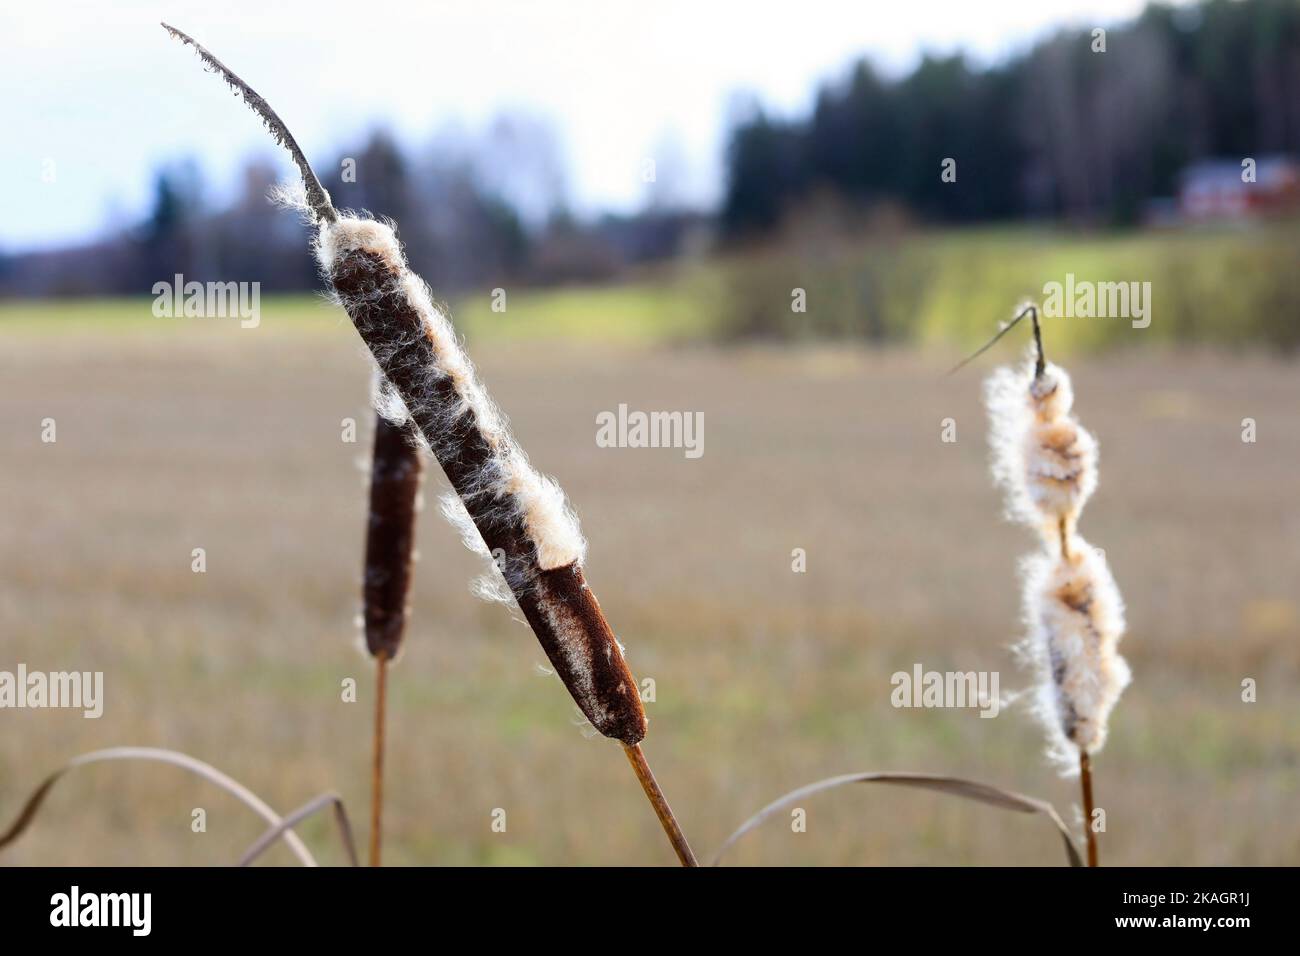 Ripe seedheads of Typha latifolia, also called Bulrush or Common Cattail, in winter. The cottony fluff will disperse by wind. Stock Photo